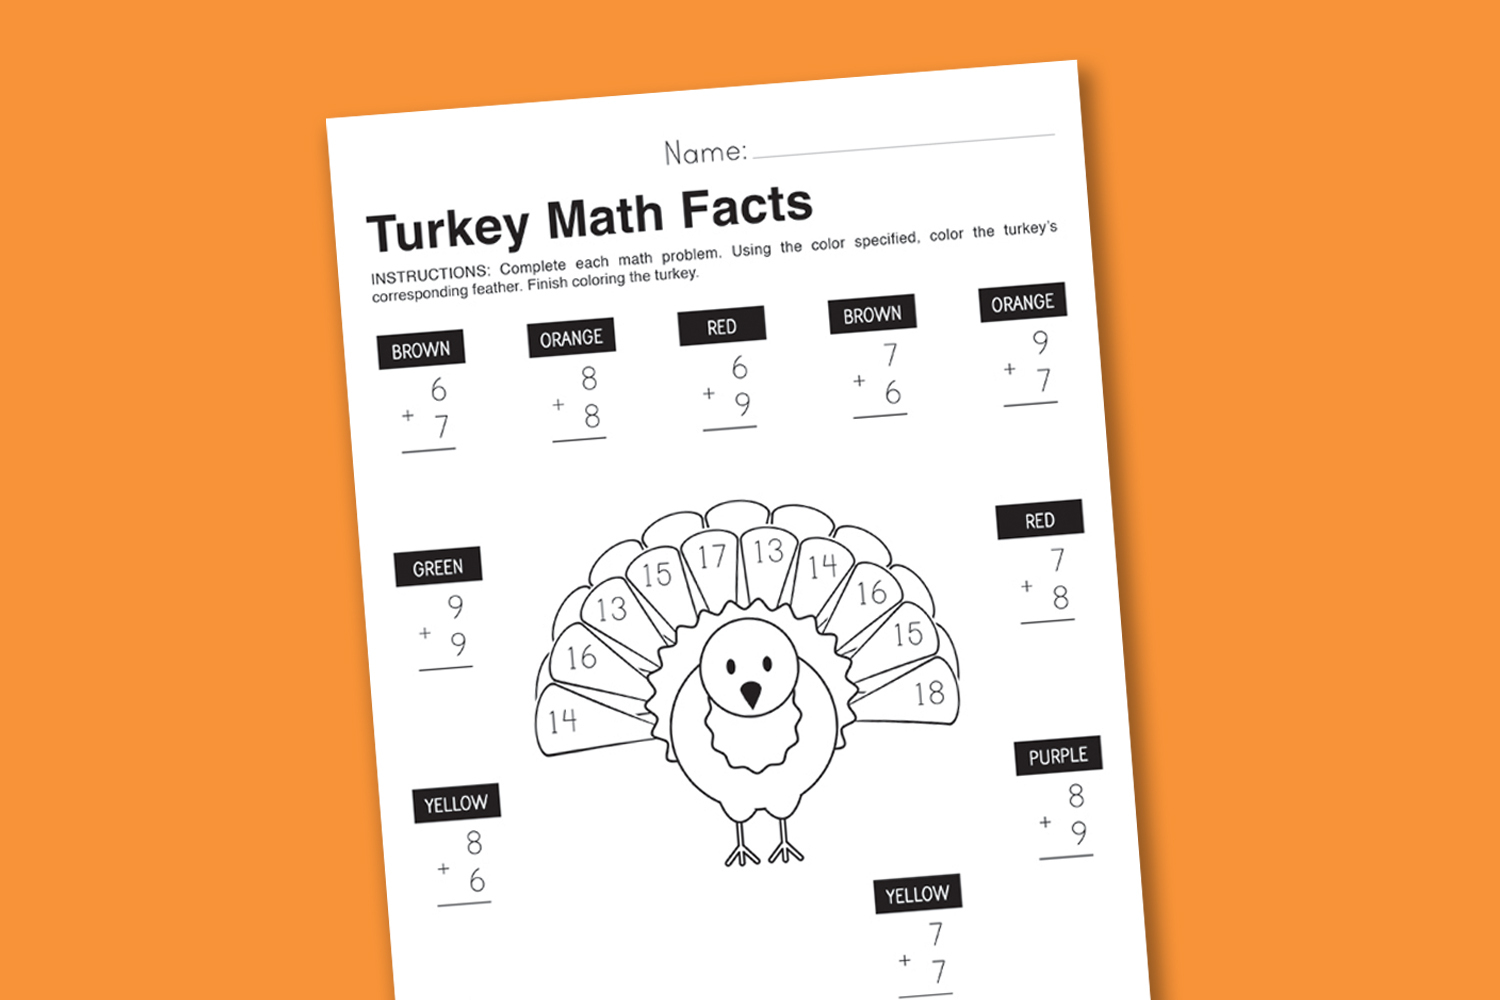 Worksheet Wednesday: Turkey Math Facts - Paging Supermom | Printable Thanksgiving Math Worksheets